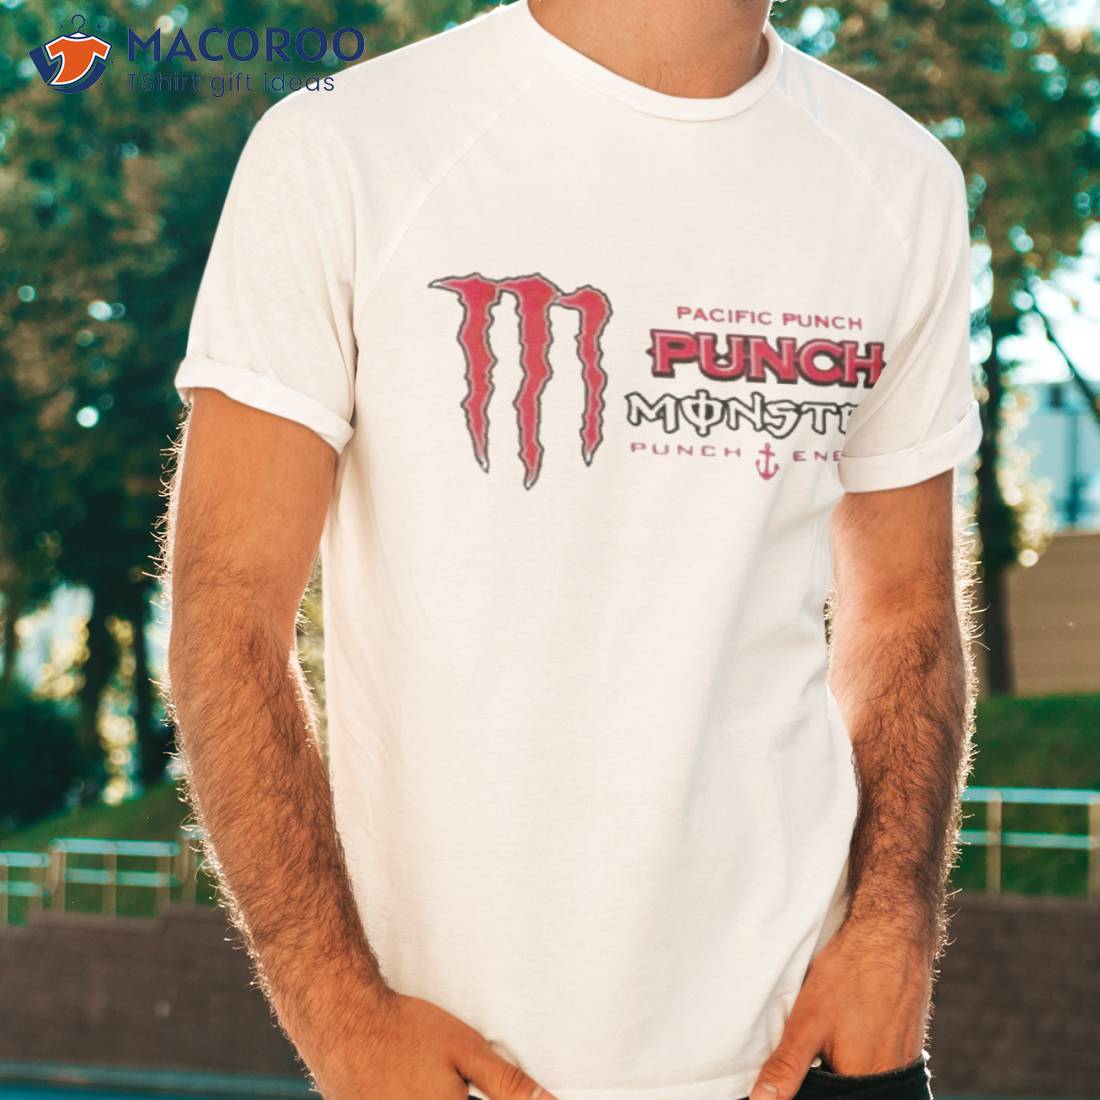 Pacific Punch Punch Monster Punch Shirt